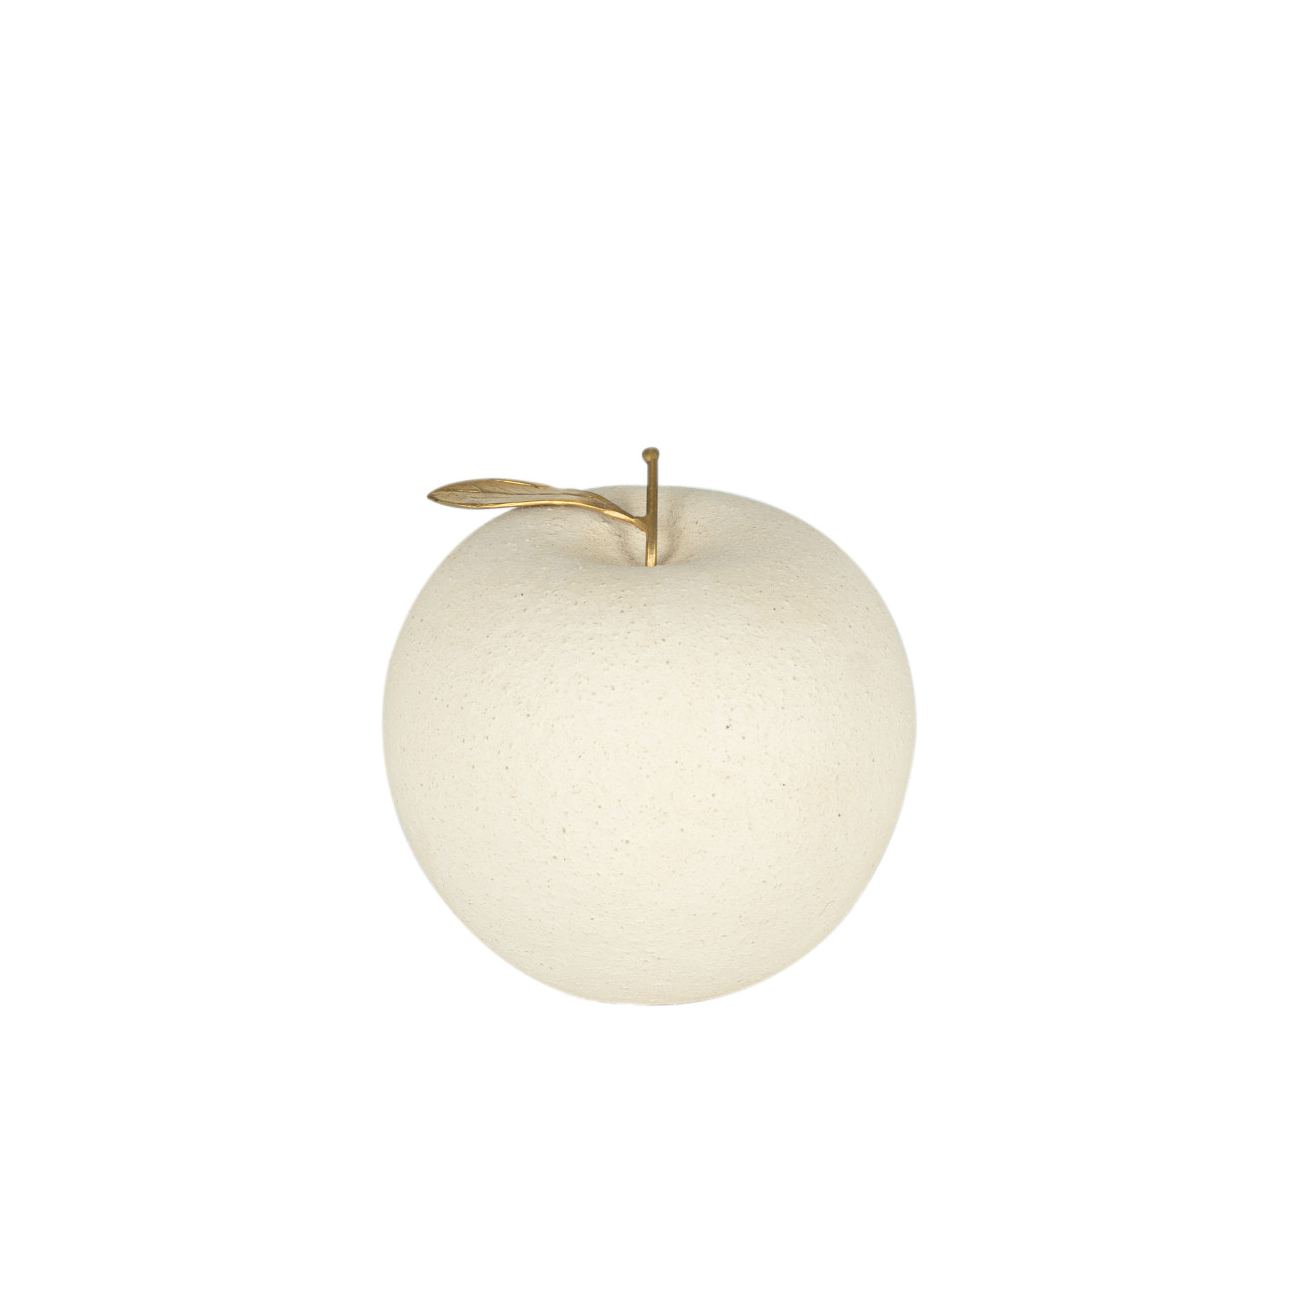 White & Blue Details about   Set of 3 Handmade Ceramic & Brass Decorative Apples Red 